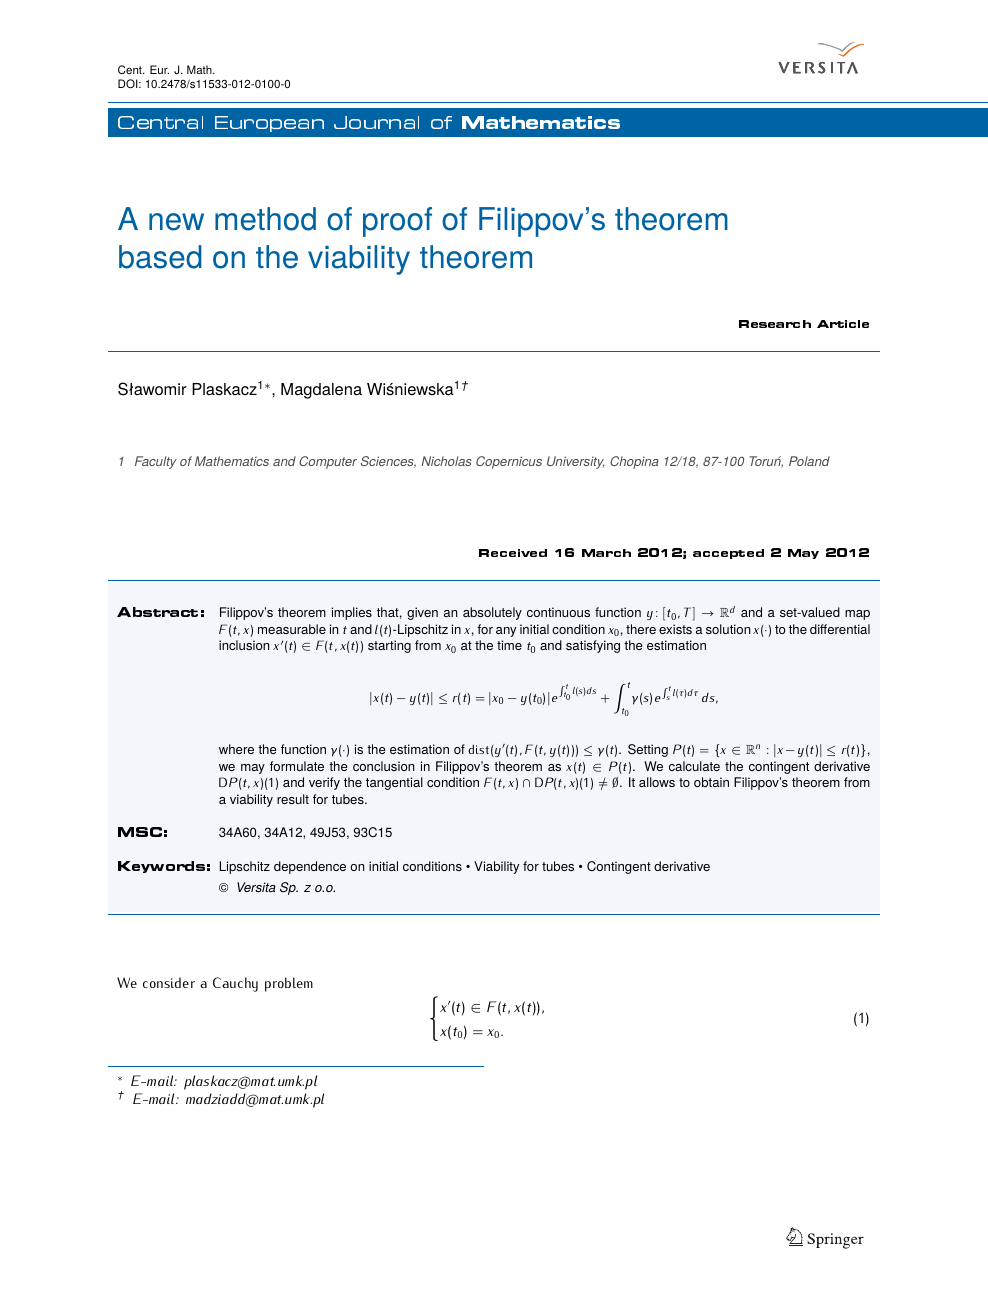 A New Method Of Proof Of Filippov S Theorem Based On The Viability Theorem Topic Of Research Paper In Mathematics Download Scholarly Article Pdf And Read For Free On Cyberleninka Open Science